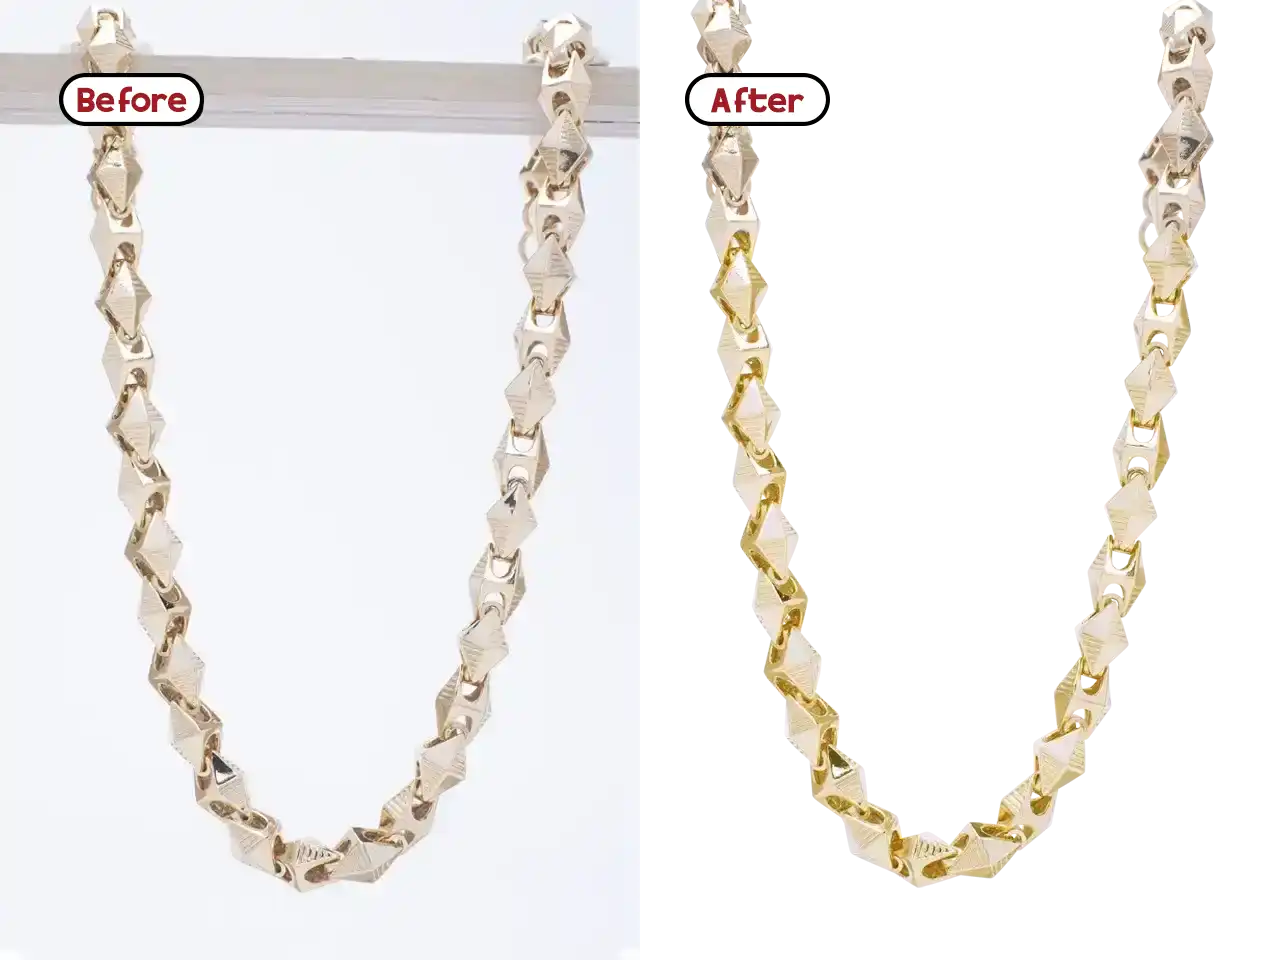 Jewellery Clipping Path, Retouching and Color change graphinery